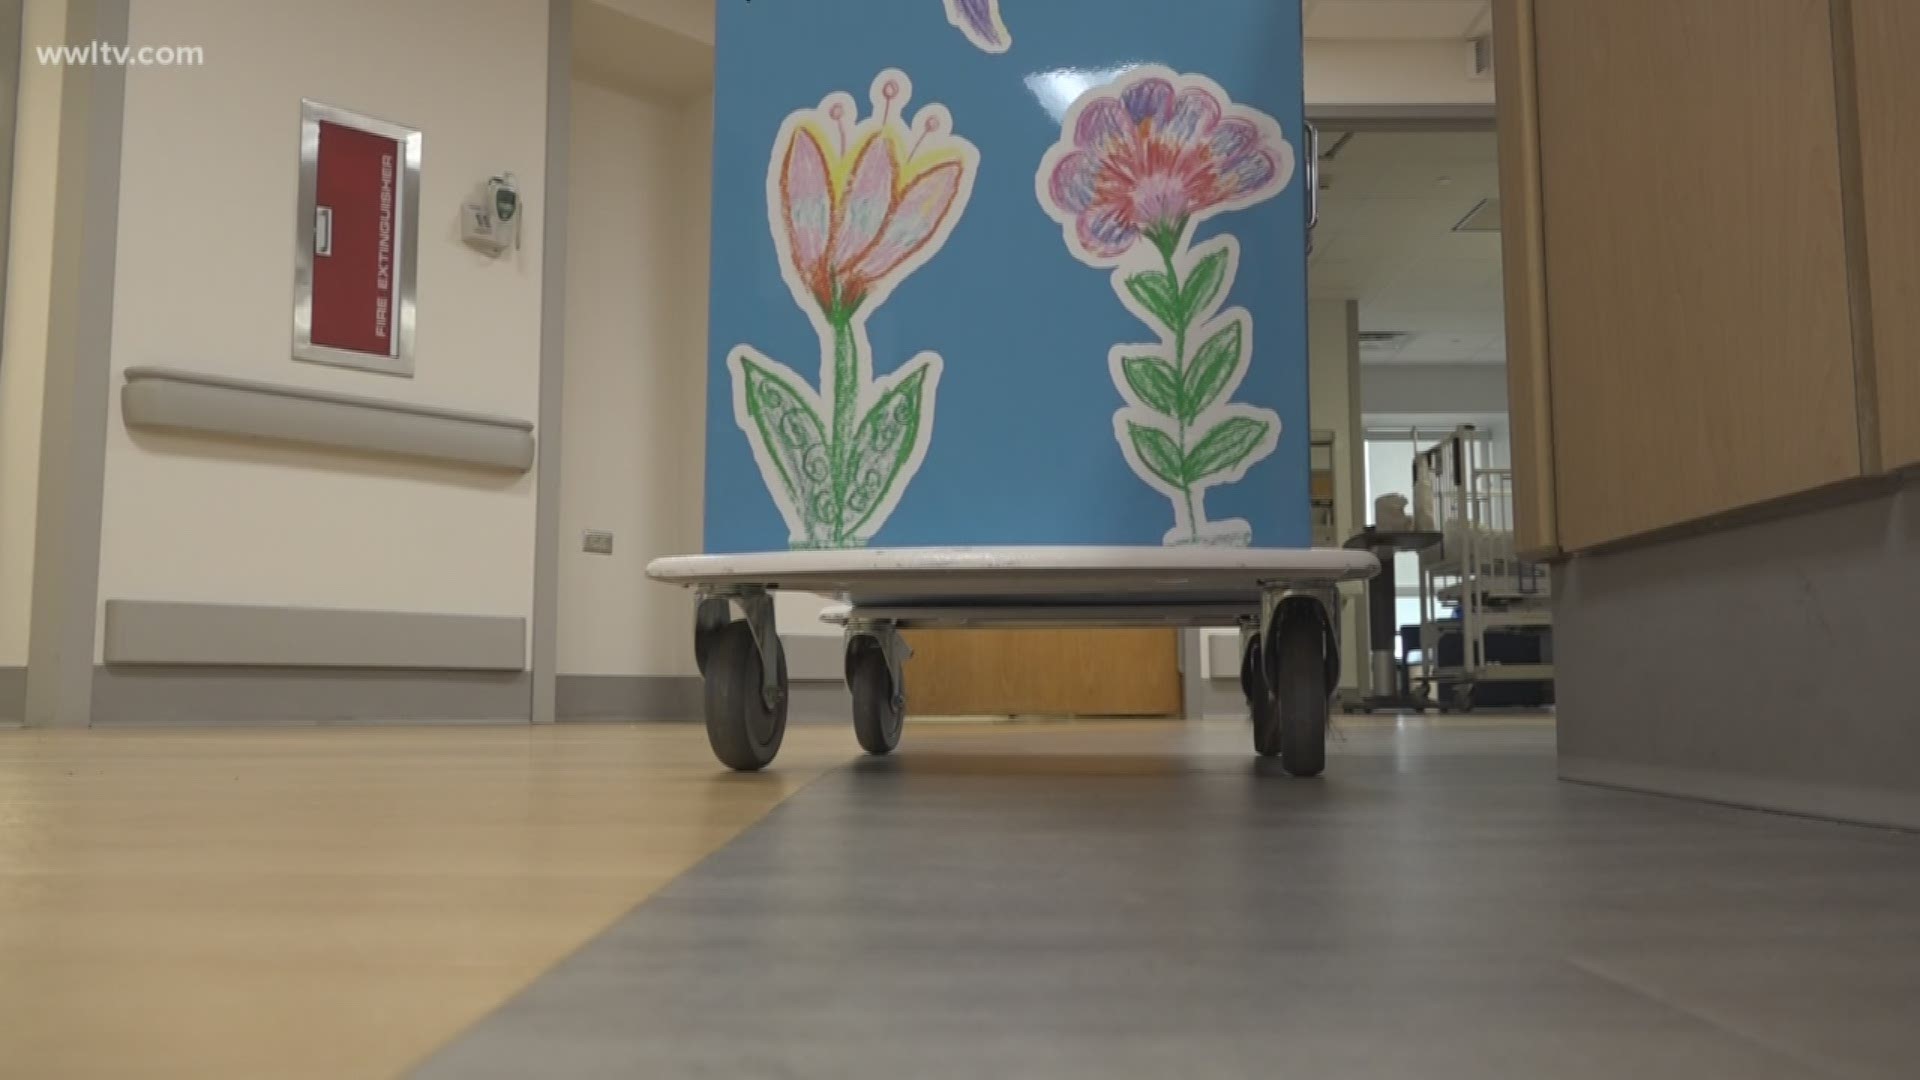 Every week Claire Thriffiley makes her way through the hallways bringing a little bit of color to a sterile place. Thriffiley knows first hand the impact art can have on the lives of patients.